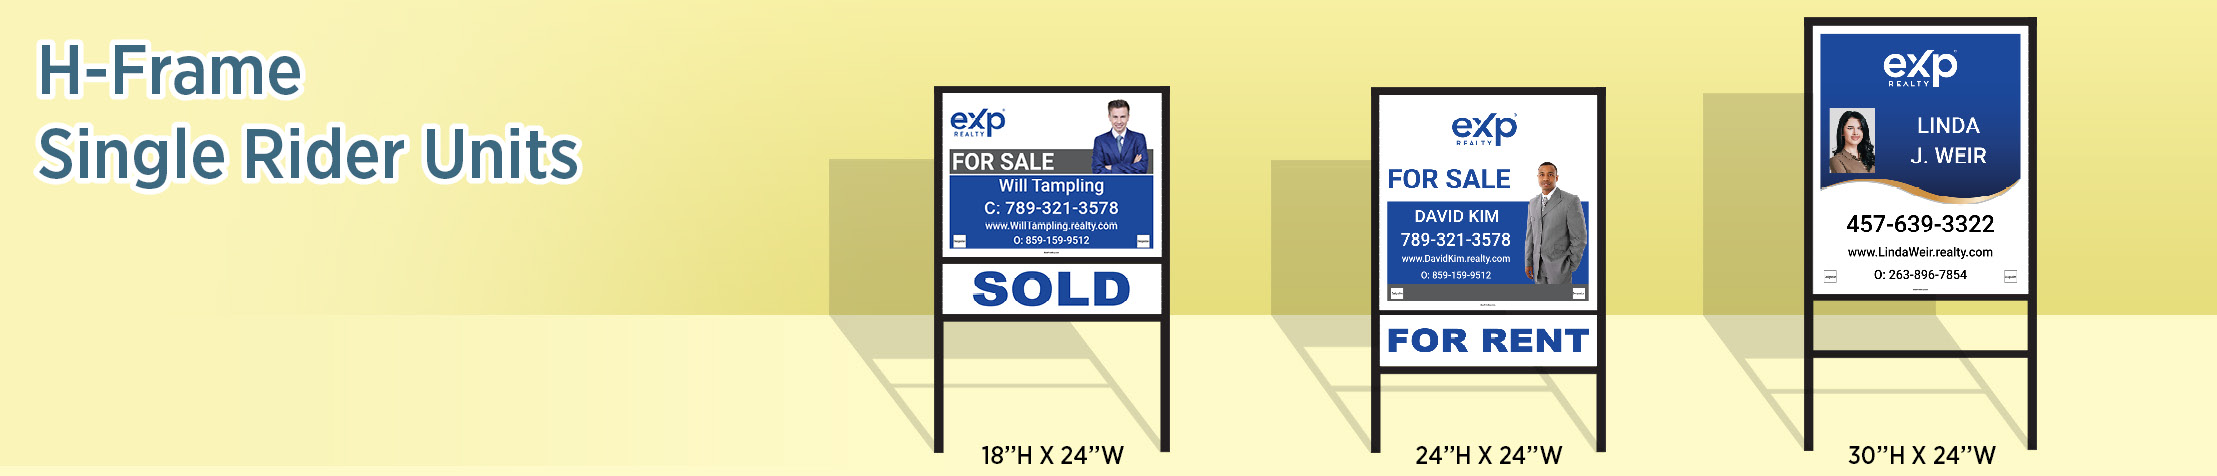 eXp Realty Real Estate H-Frame Single Rider Units - eXp Realty real estate signs | BestPrintBuy.com